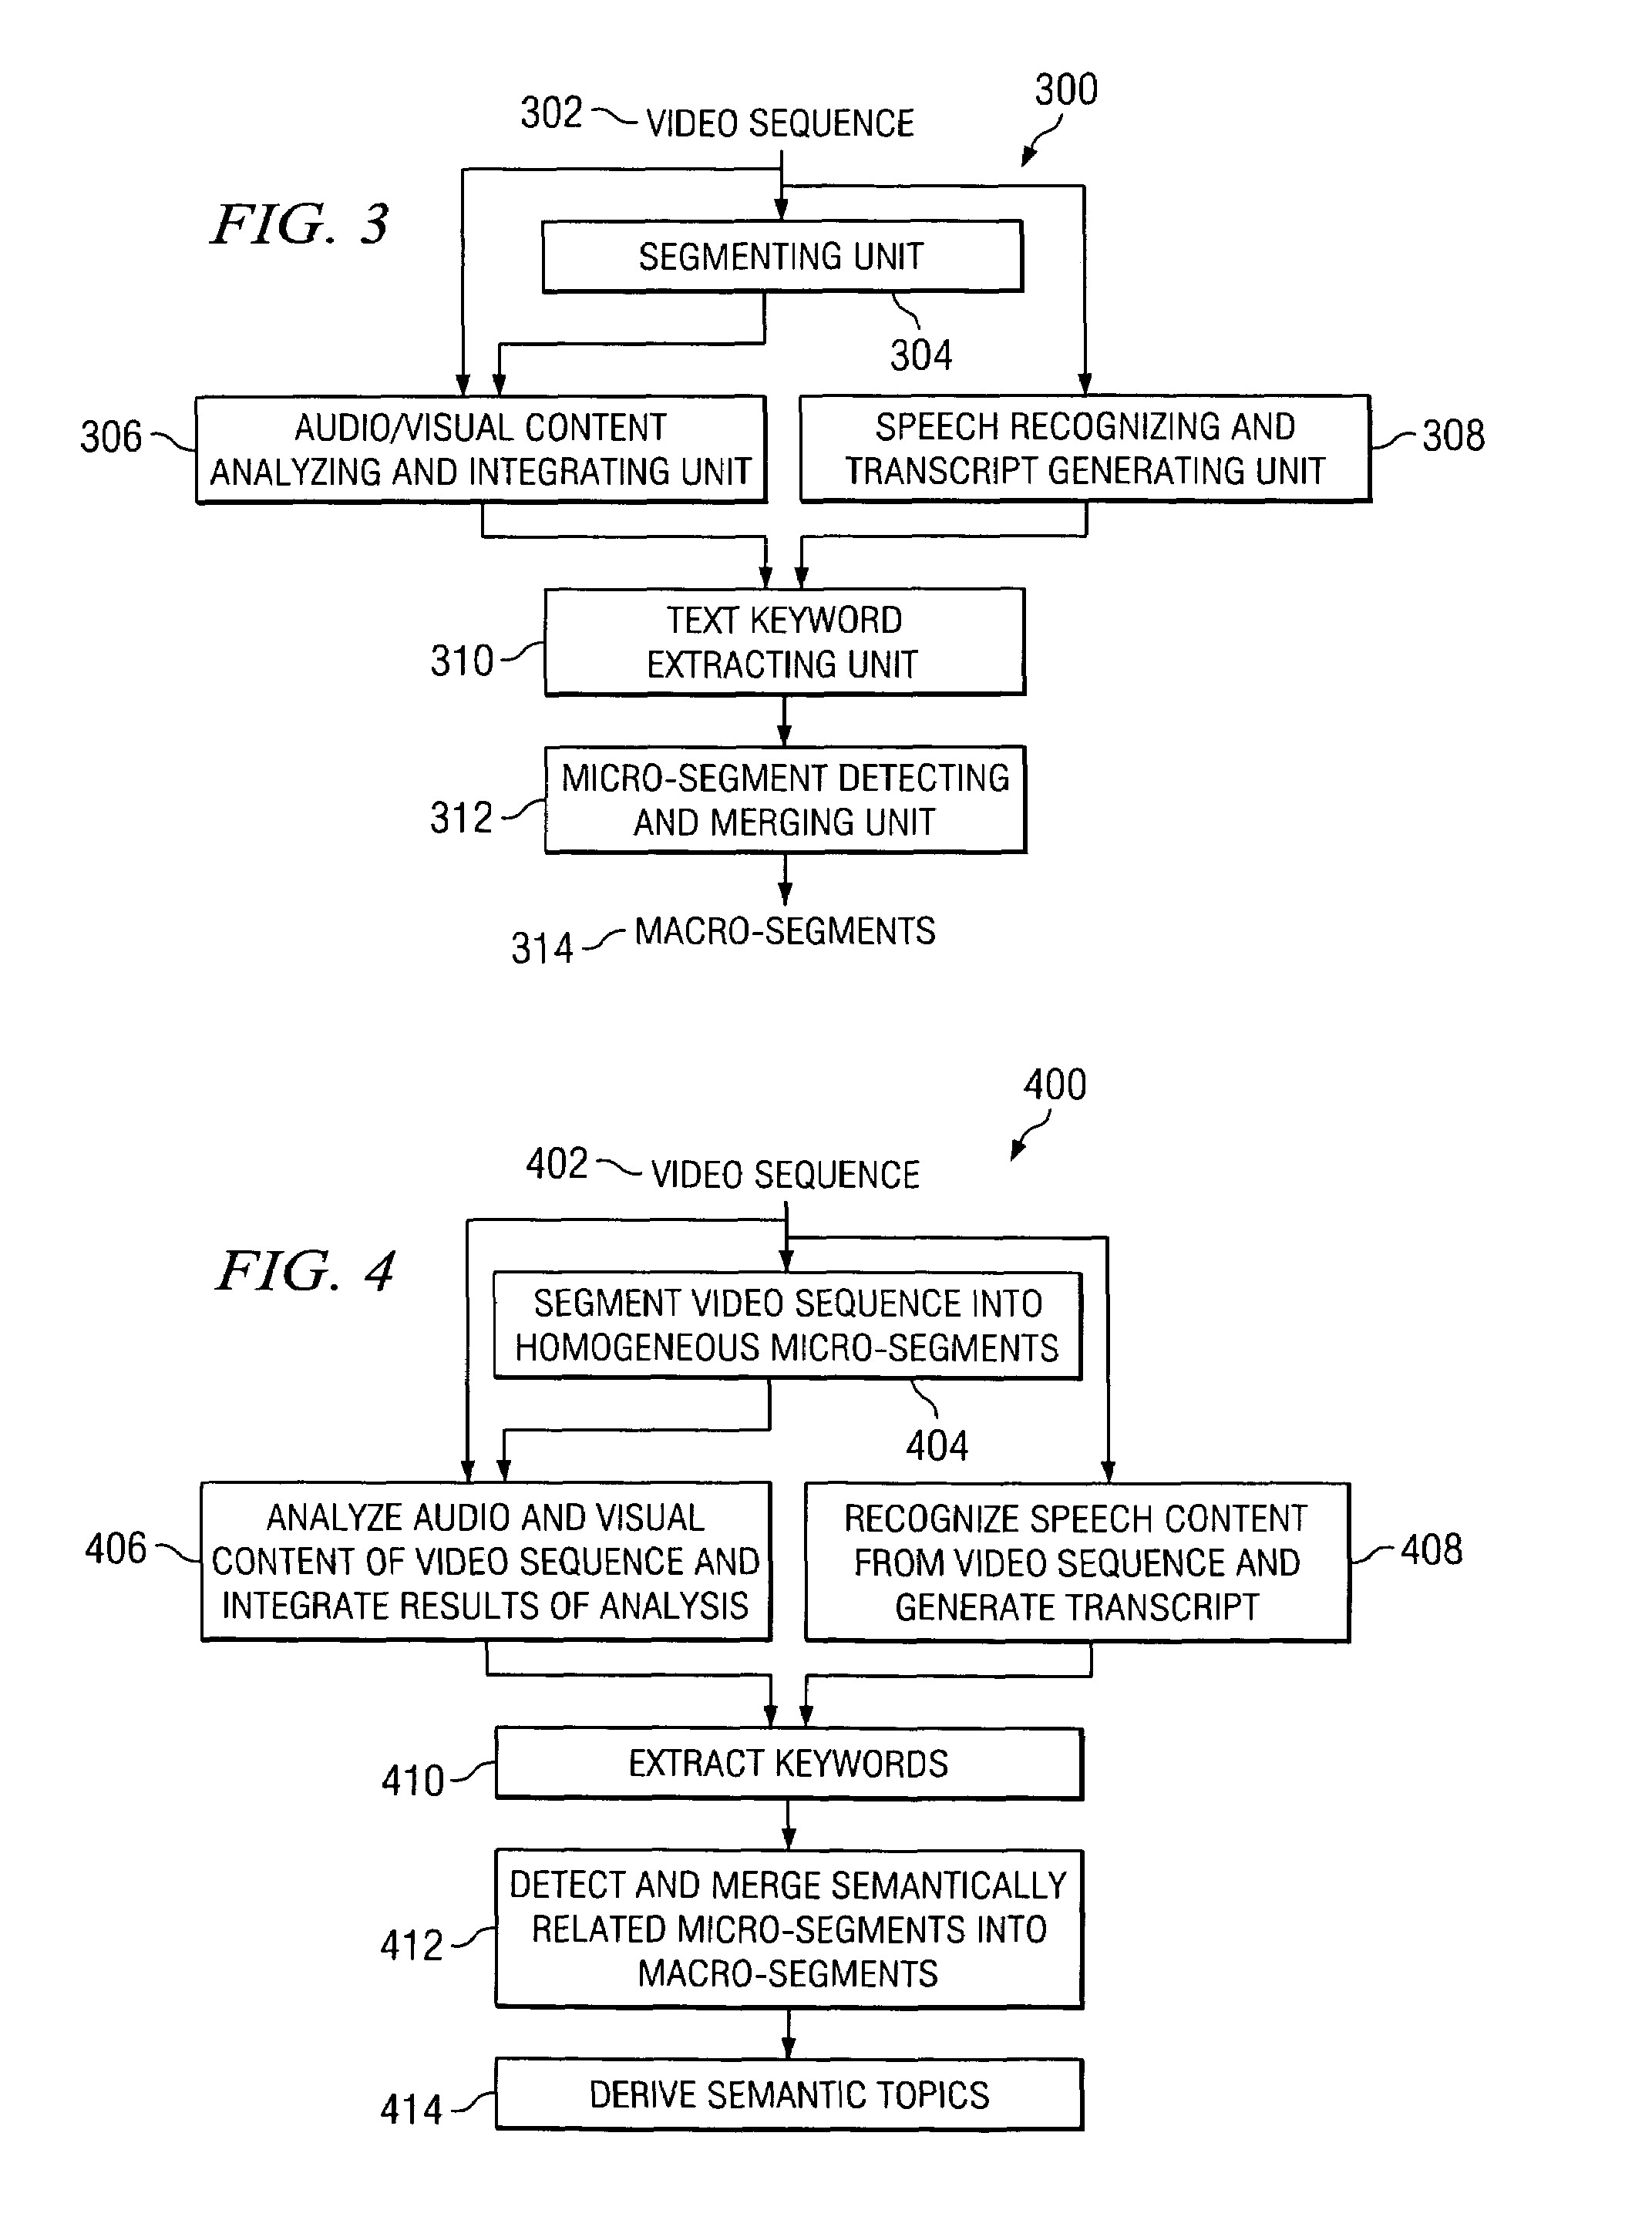 System and method for semantic video segmentation based on joint audiovisual and text analysis